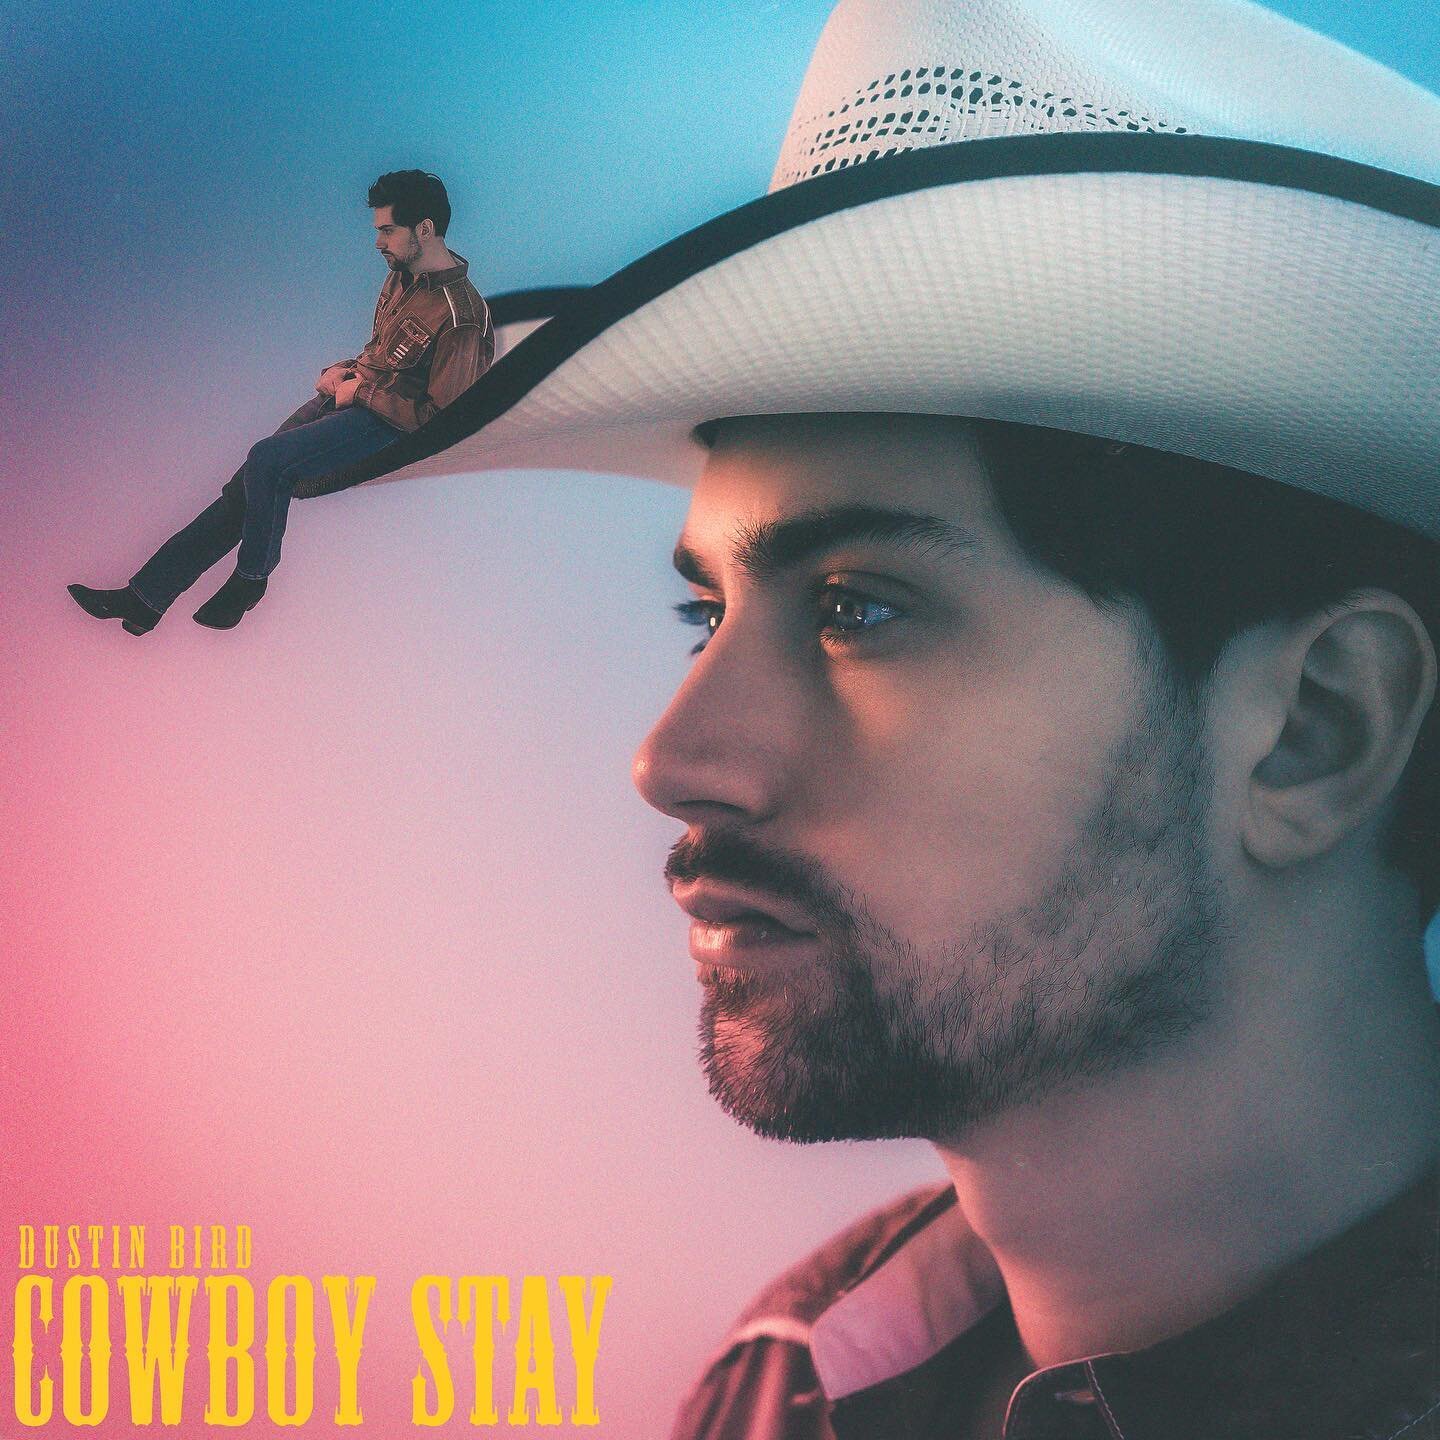 Cowboy Stay by @dustin_bird is available now. 📸 cover by yours truly.